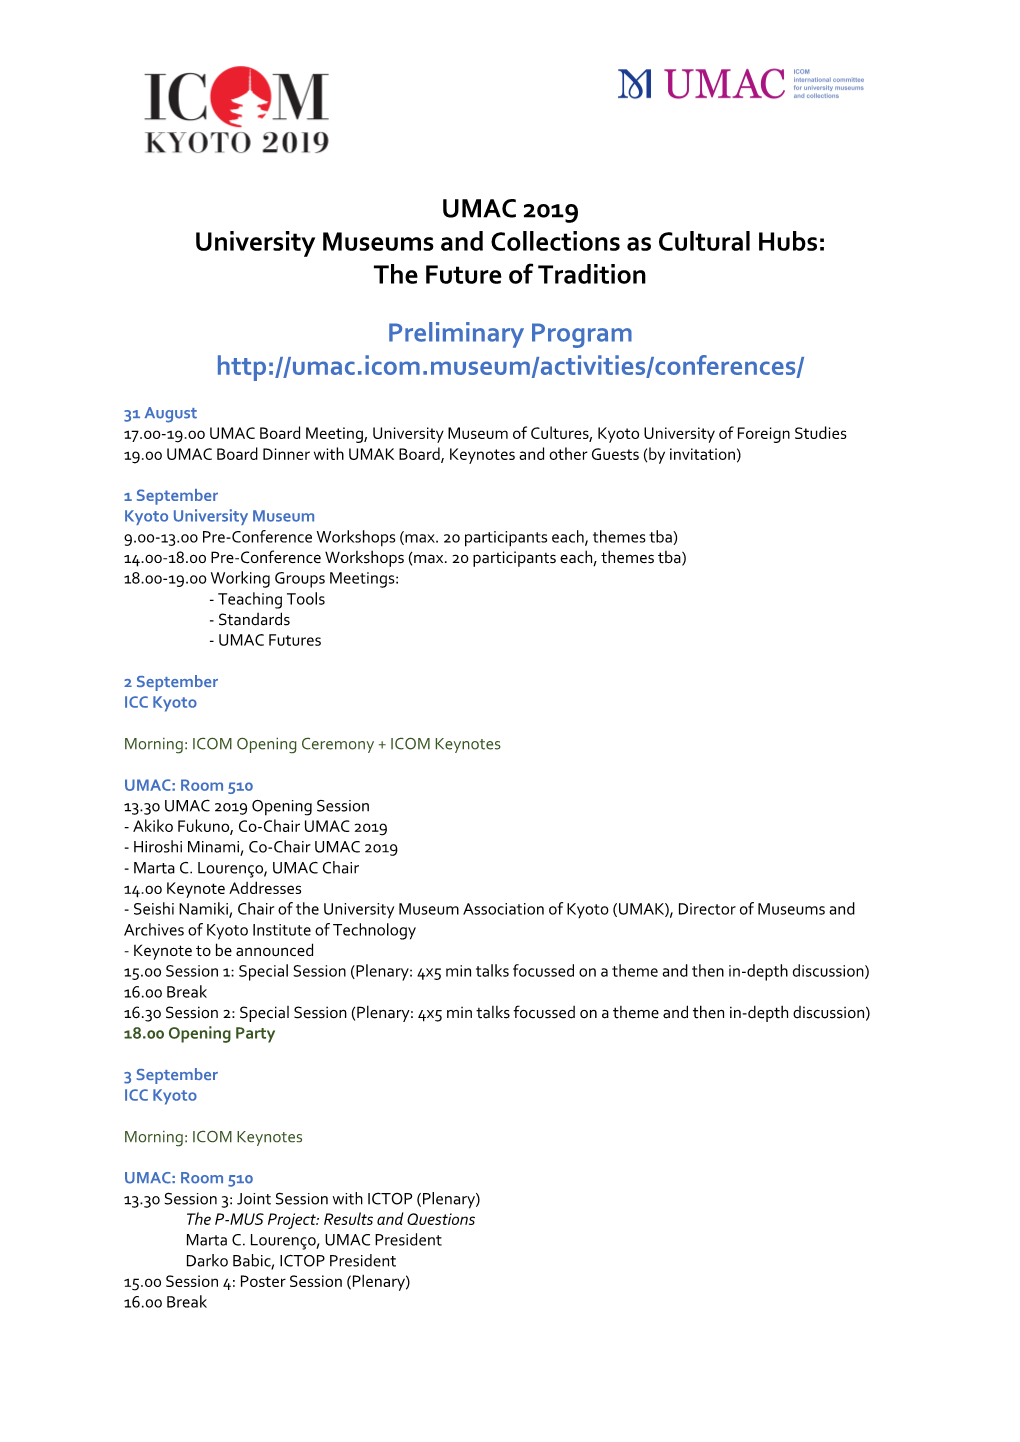 UMAC 2019 University Museums and Collections As Cultural Hubs: the Future of Tradition